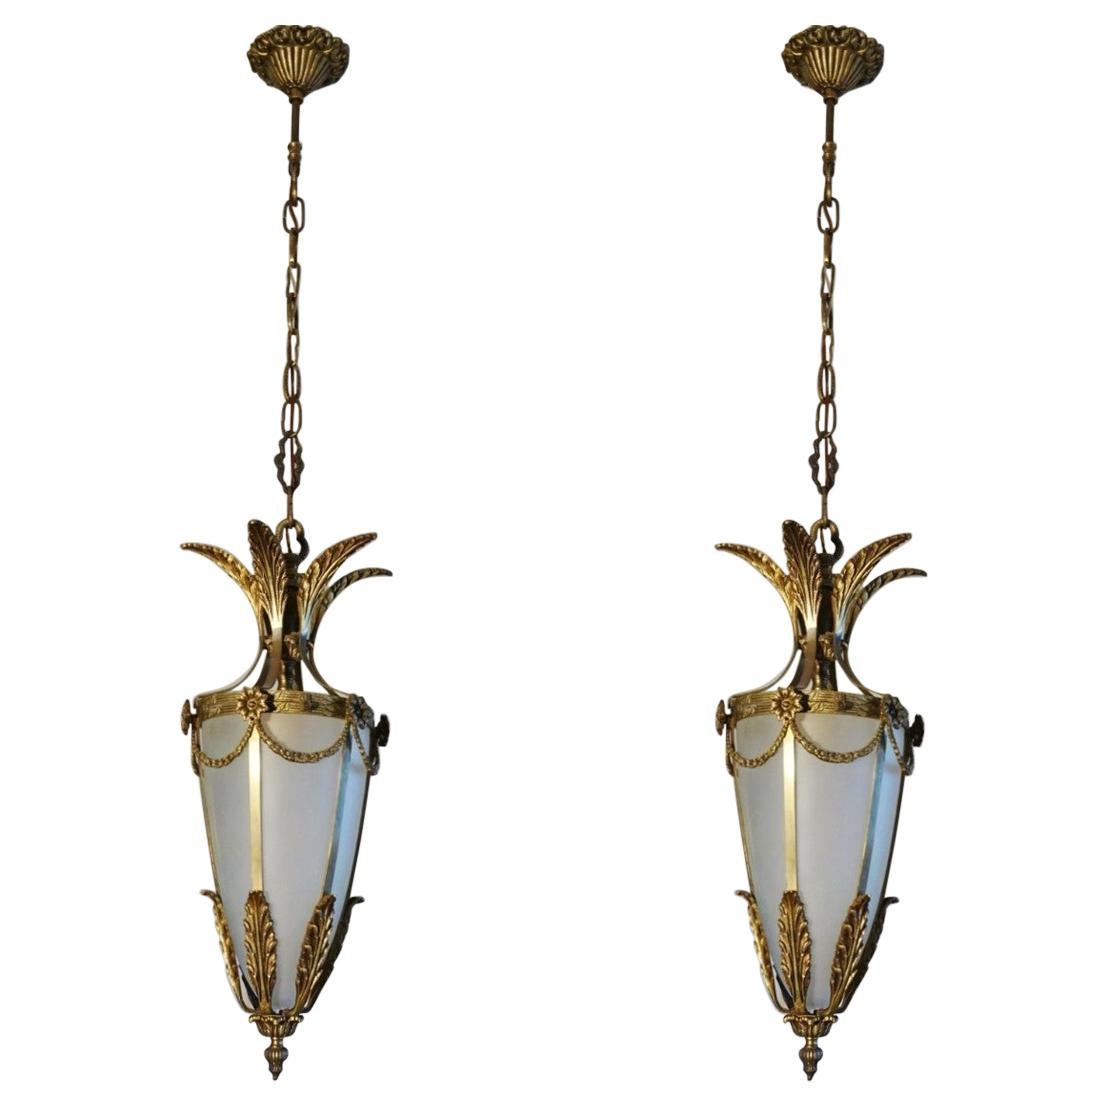 Pair of Art Deco lanterns, Italy, 1920s. Solid bronze and parcel brass with cone-shaped frosted glass shade.
Each lantern: One E27 brass and porcelain light socket for a large sized bulb up to 60W - 100W.
Dimensions:
Total height with chain 41